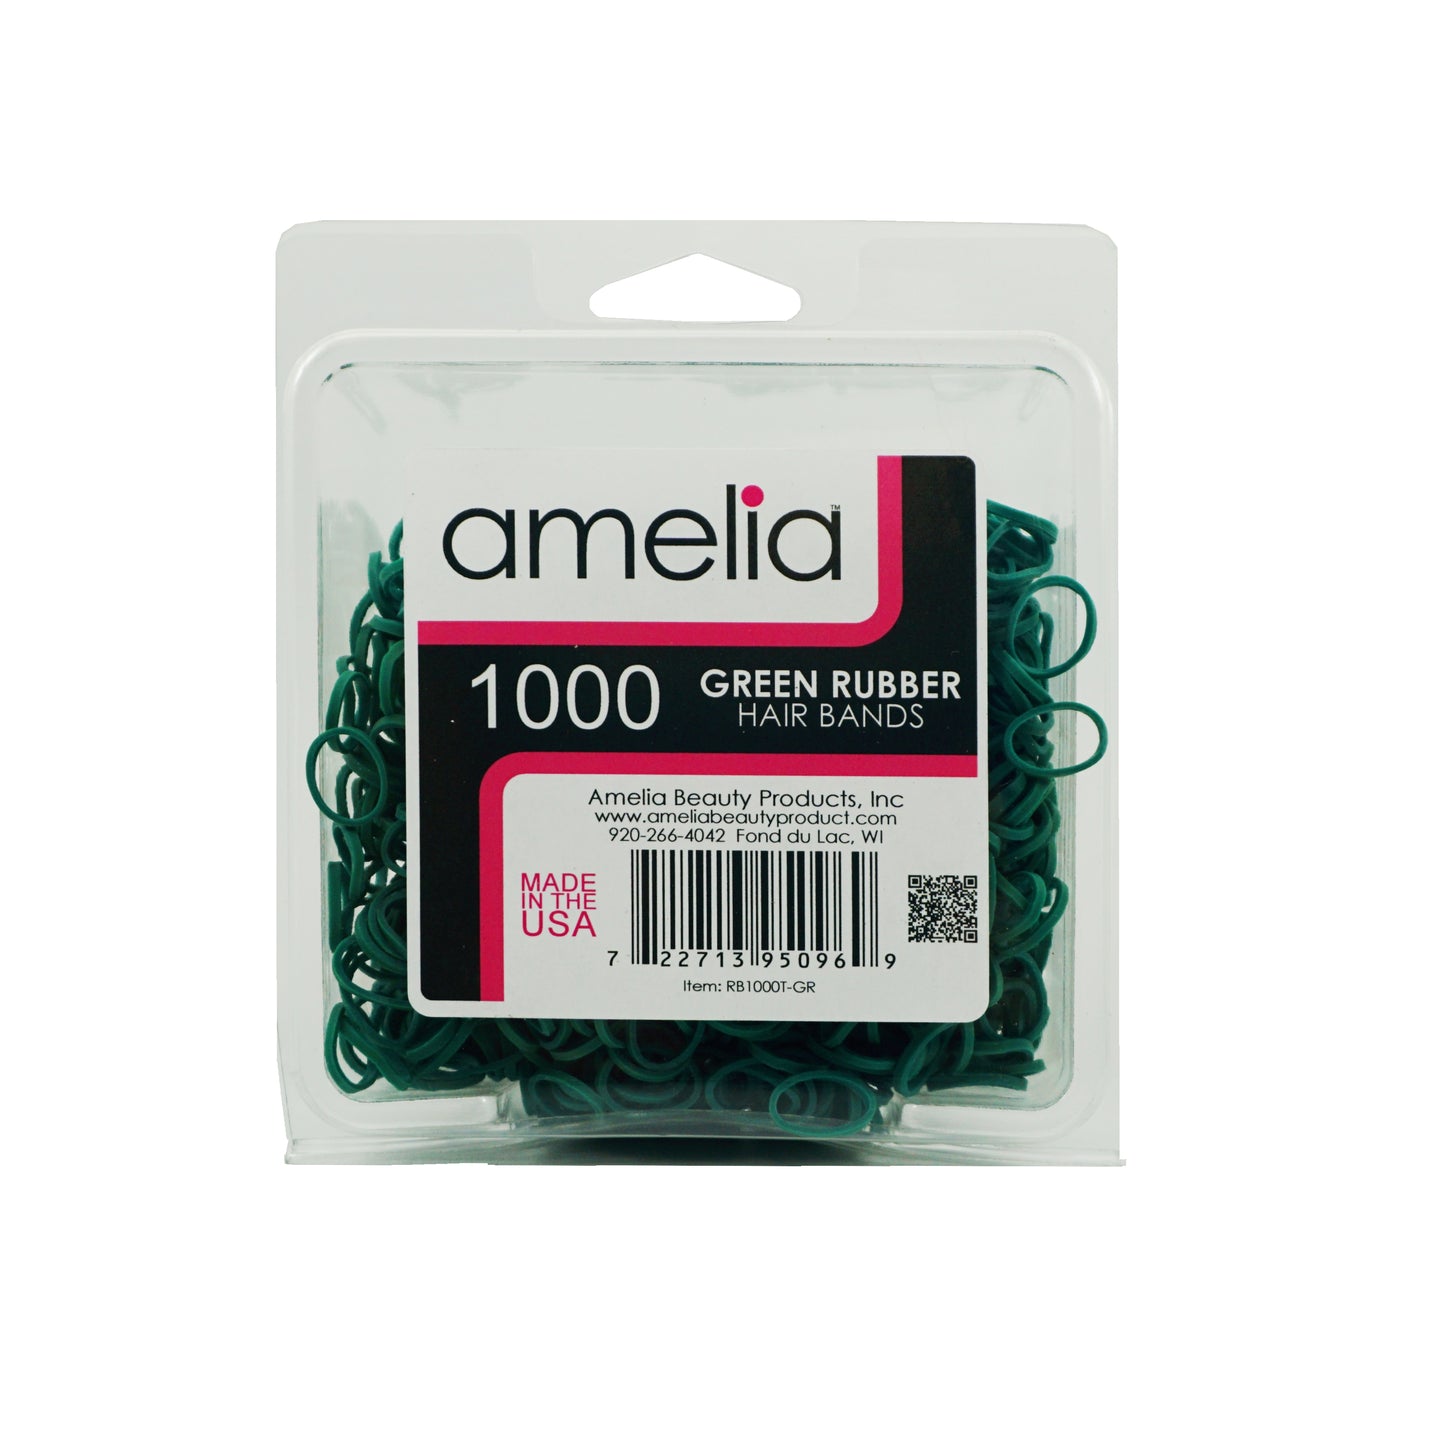 Amelia Beauty | 1/2in, Green, Elastic Rubber Band Pony Tail Holders | Made in USA, Ideal for Ponytails, Braids, Twists, Dreadlocks, Styling Accessories for Women, Men and Girls | 1000 Pack